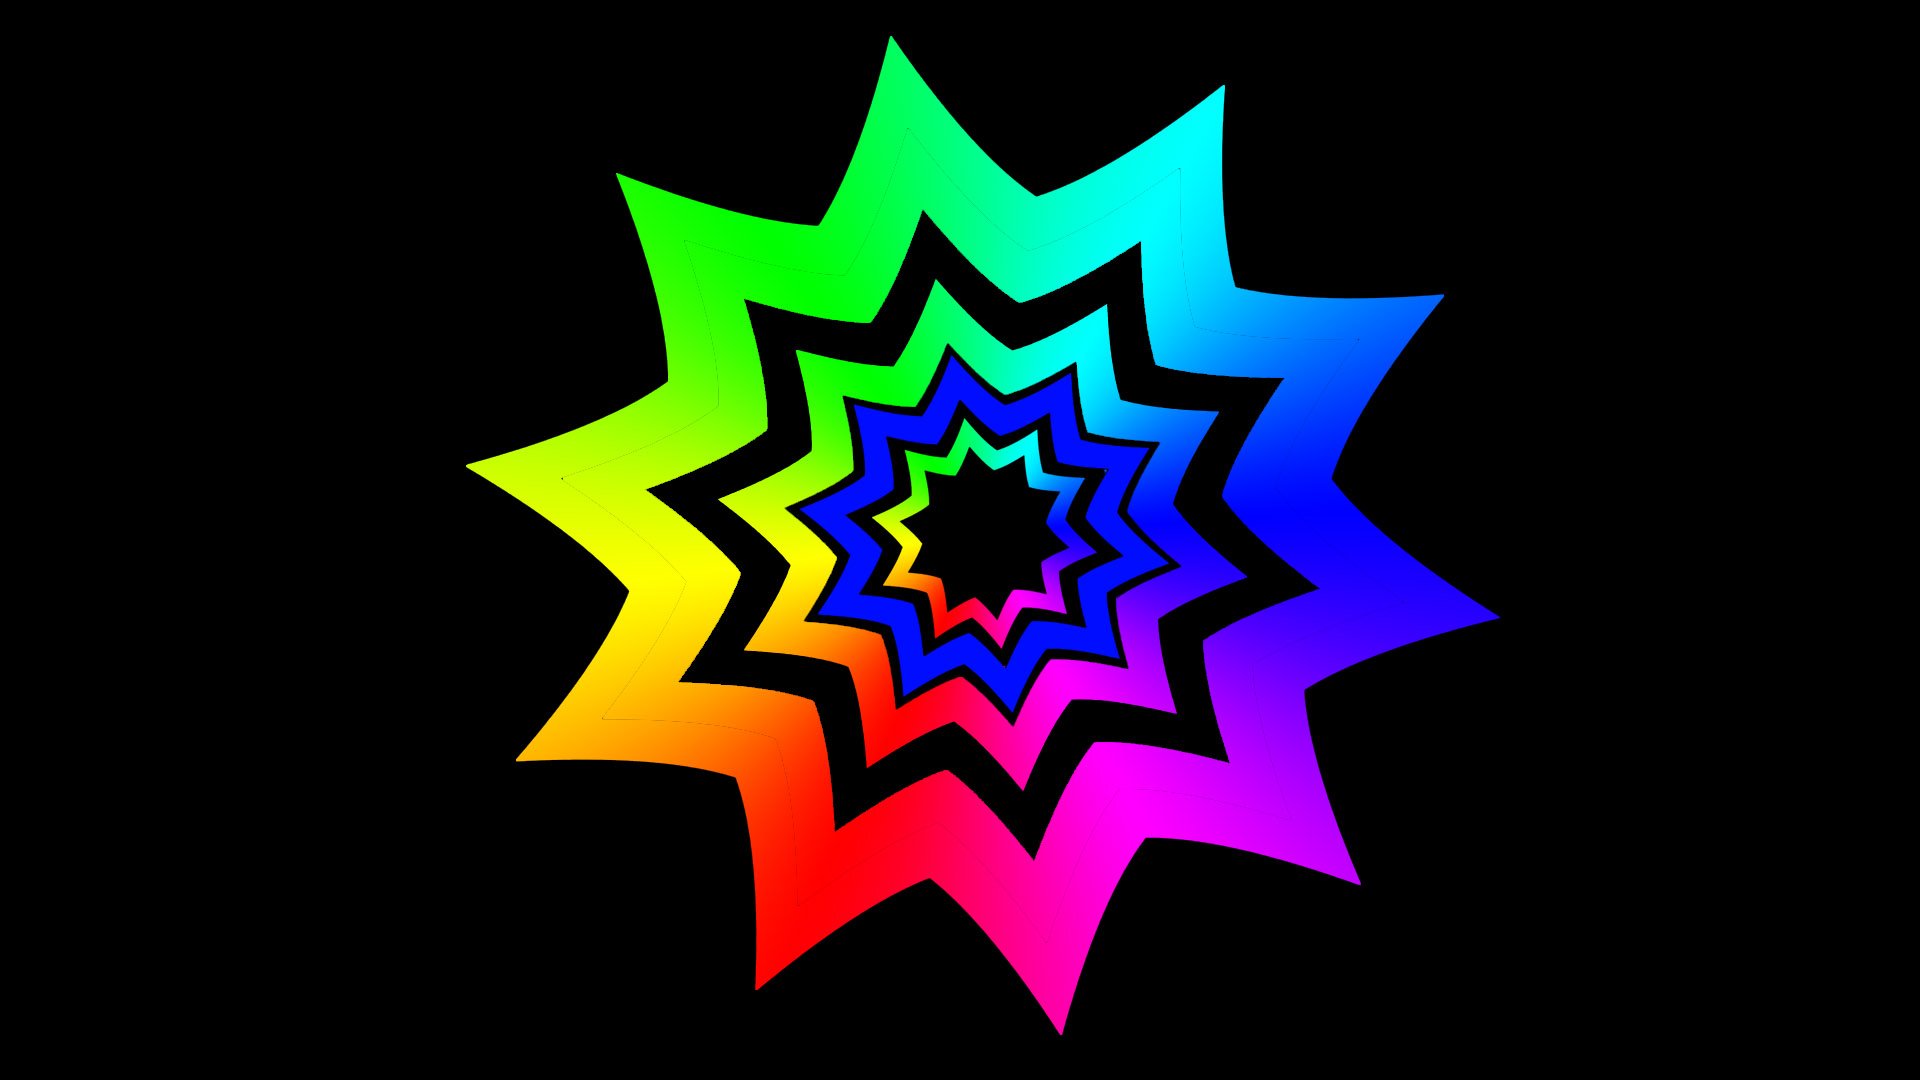 Colorful Star Hd Wallpaper Background Image 1920x1080 Id1004043